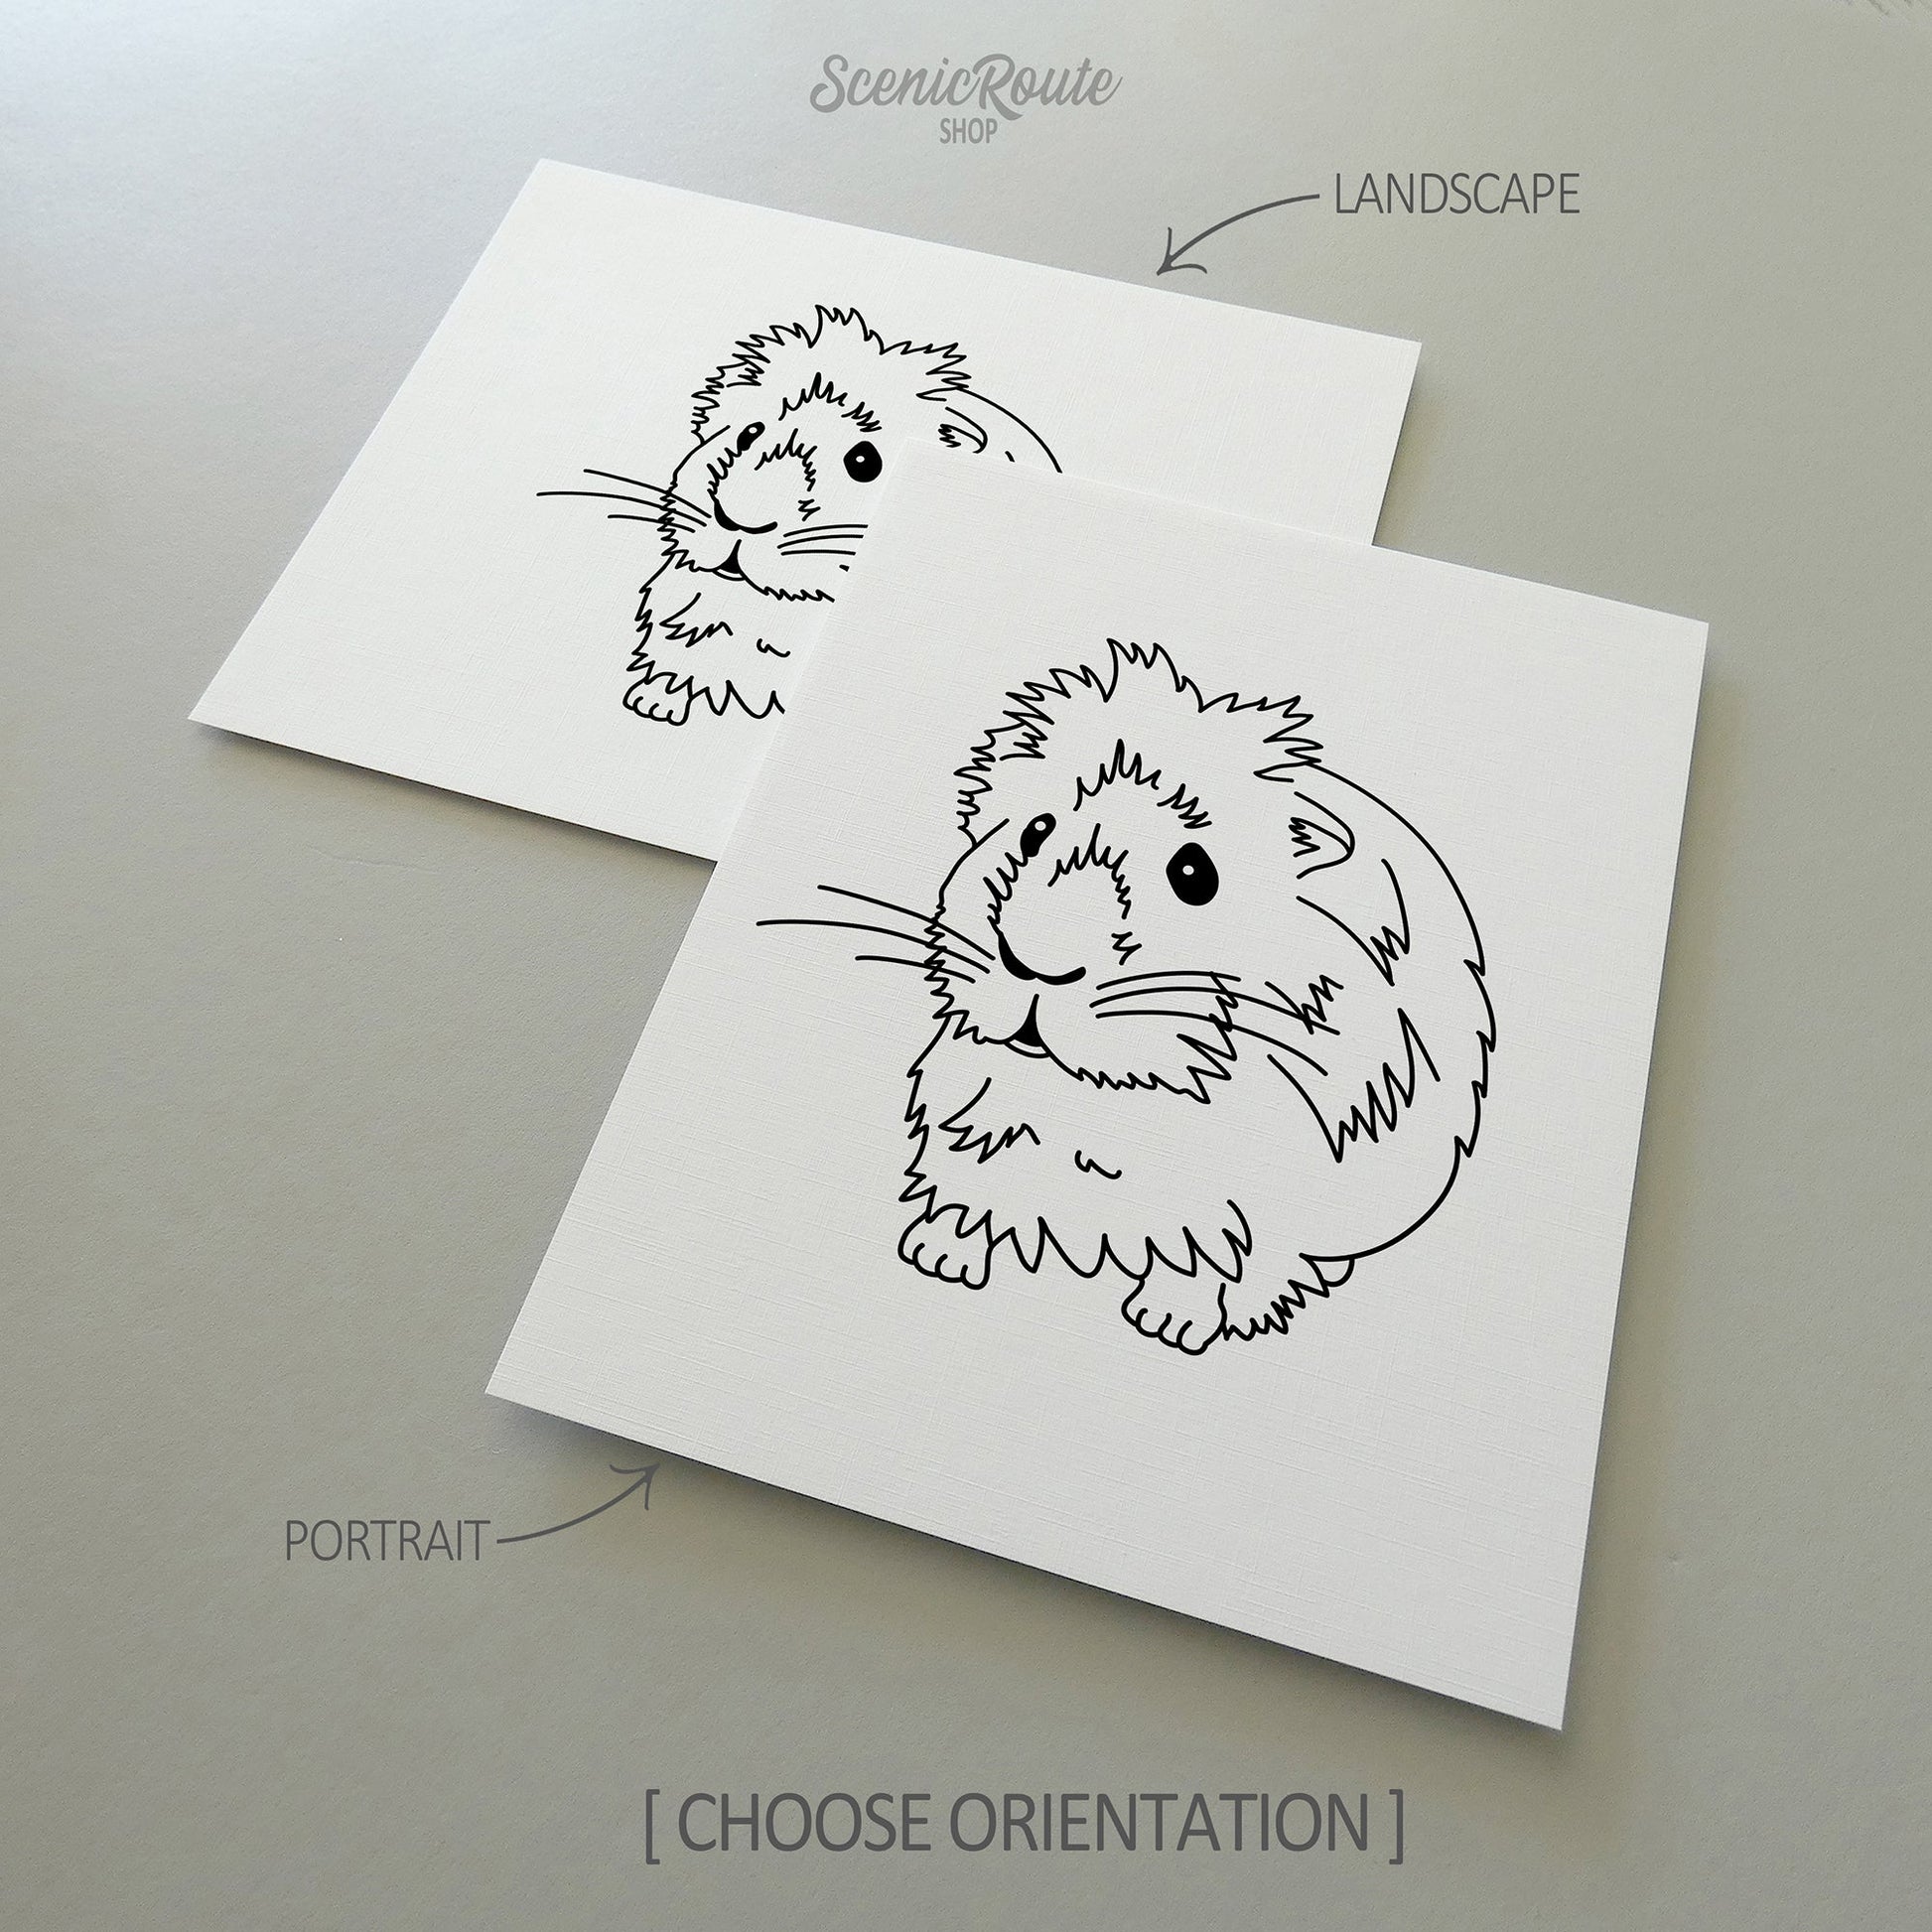 Two line art drawings of a Guinea Pig on white linen paper with a gray background.  The pieces are shown in portrait and landscape orientation for the available art print options.